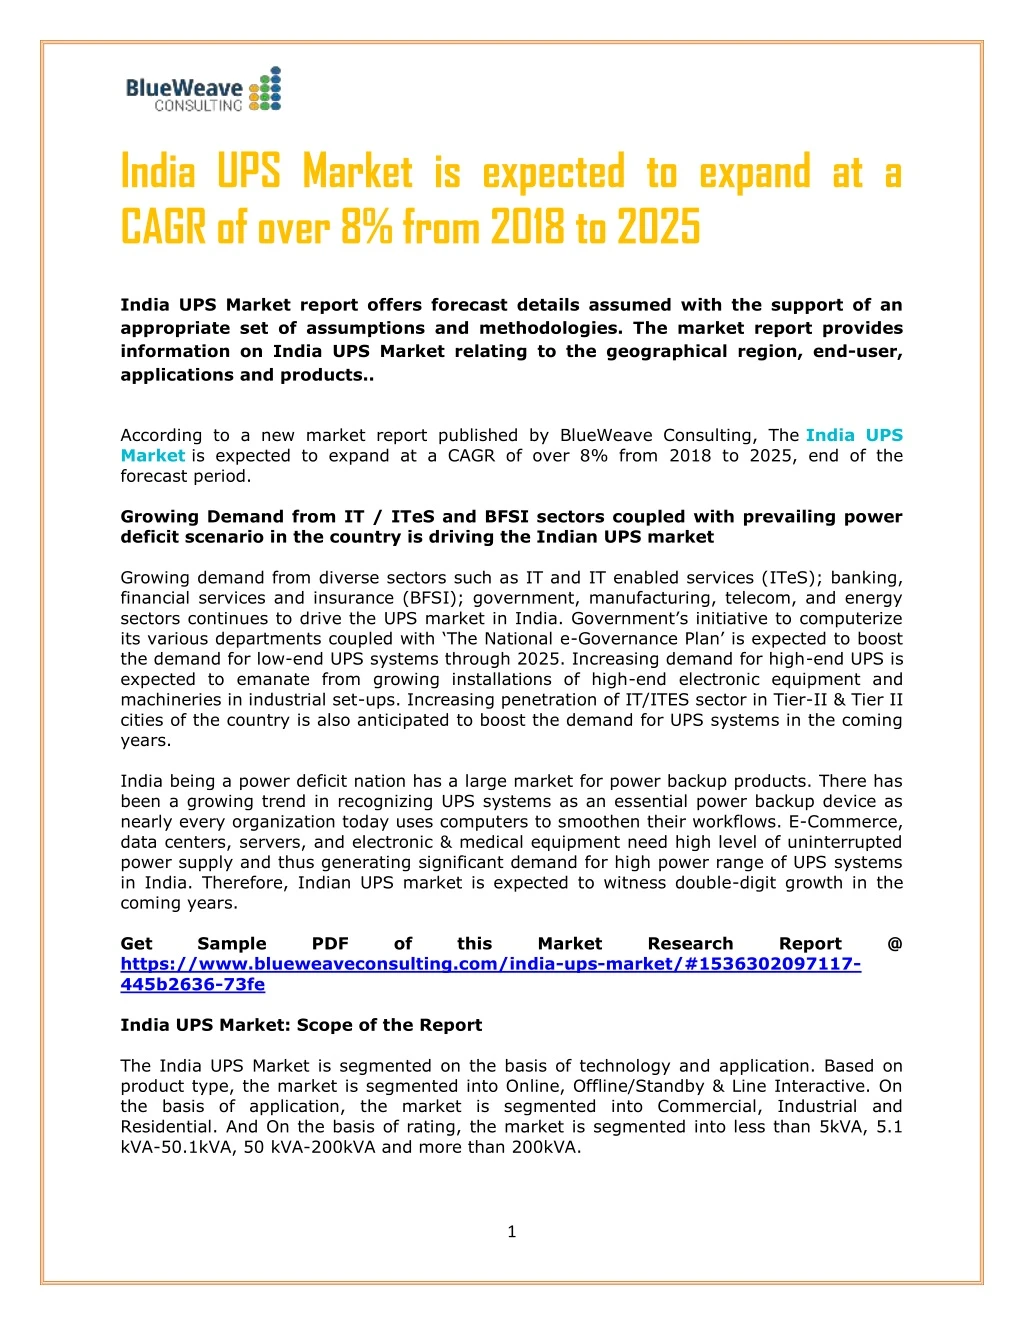 india ups market is expected to expand at a cagr